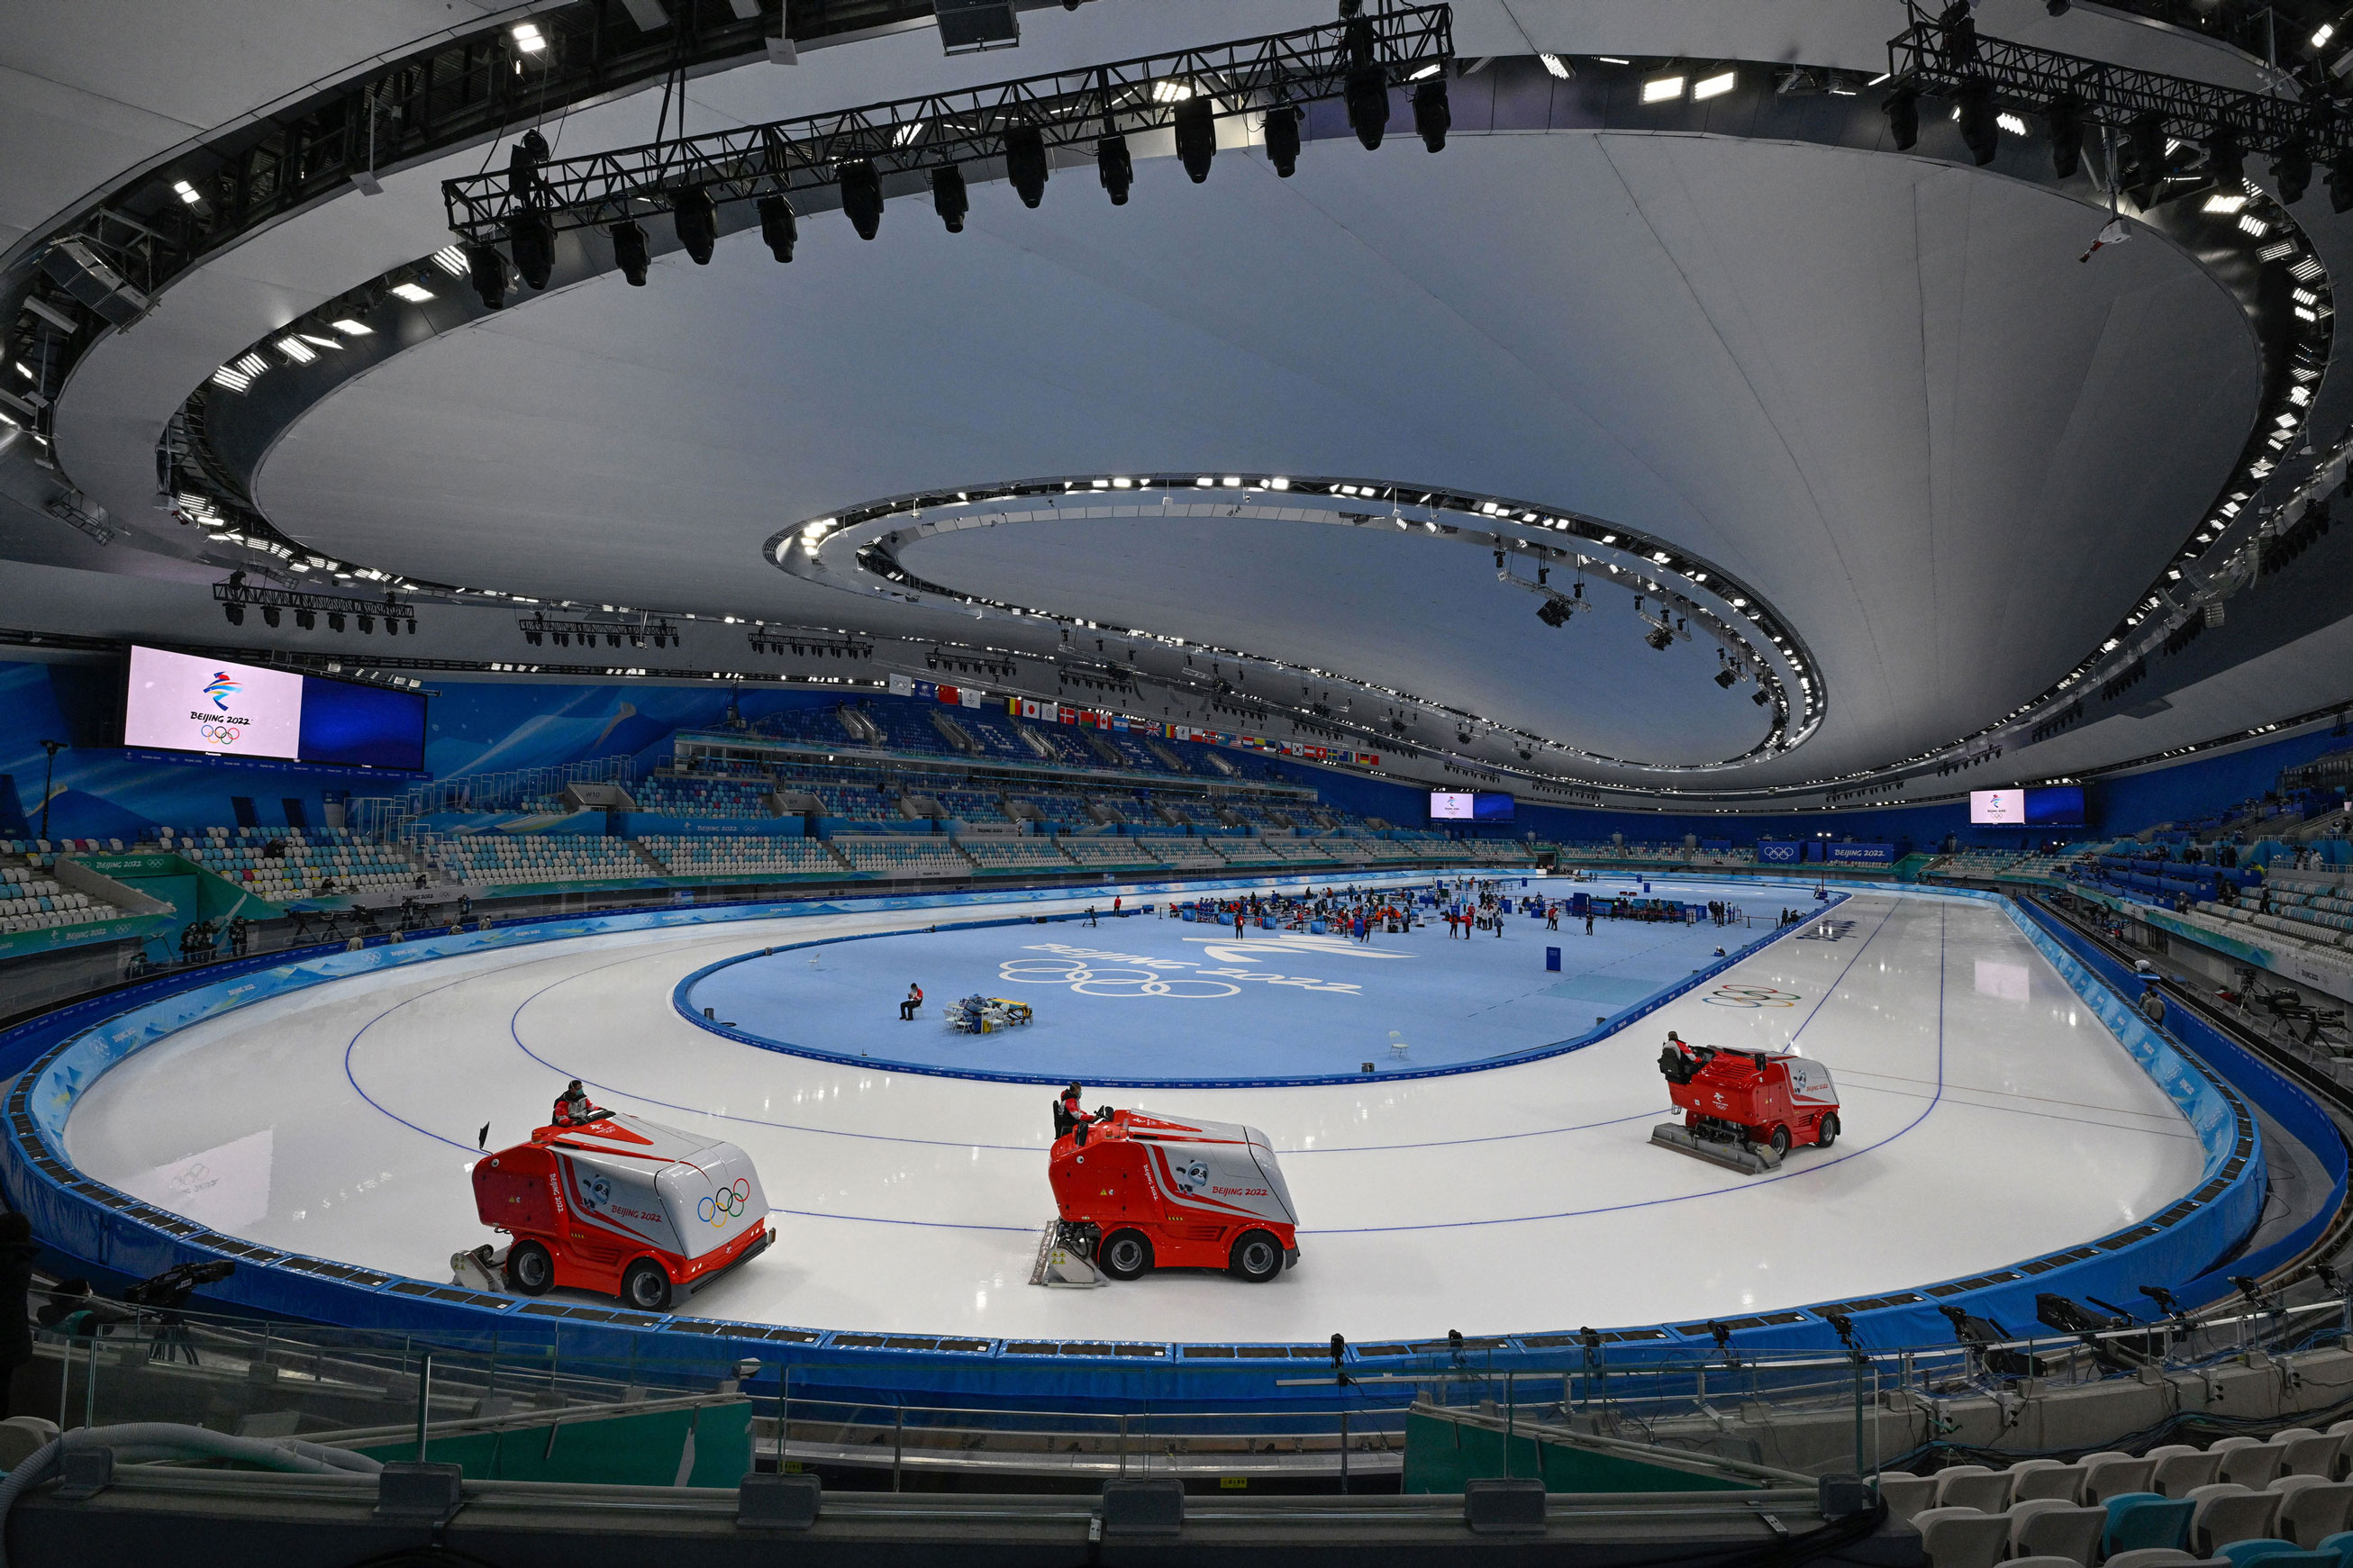 General view of the National Speed Skating Oval on Feb. 1.